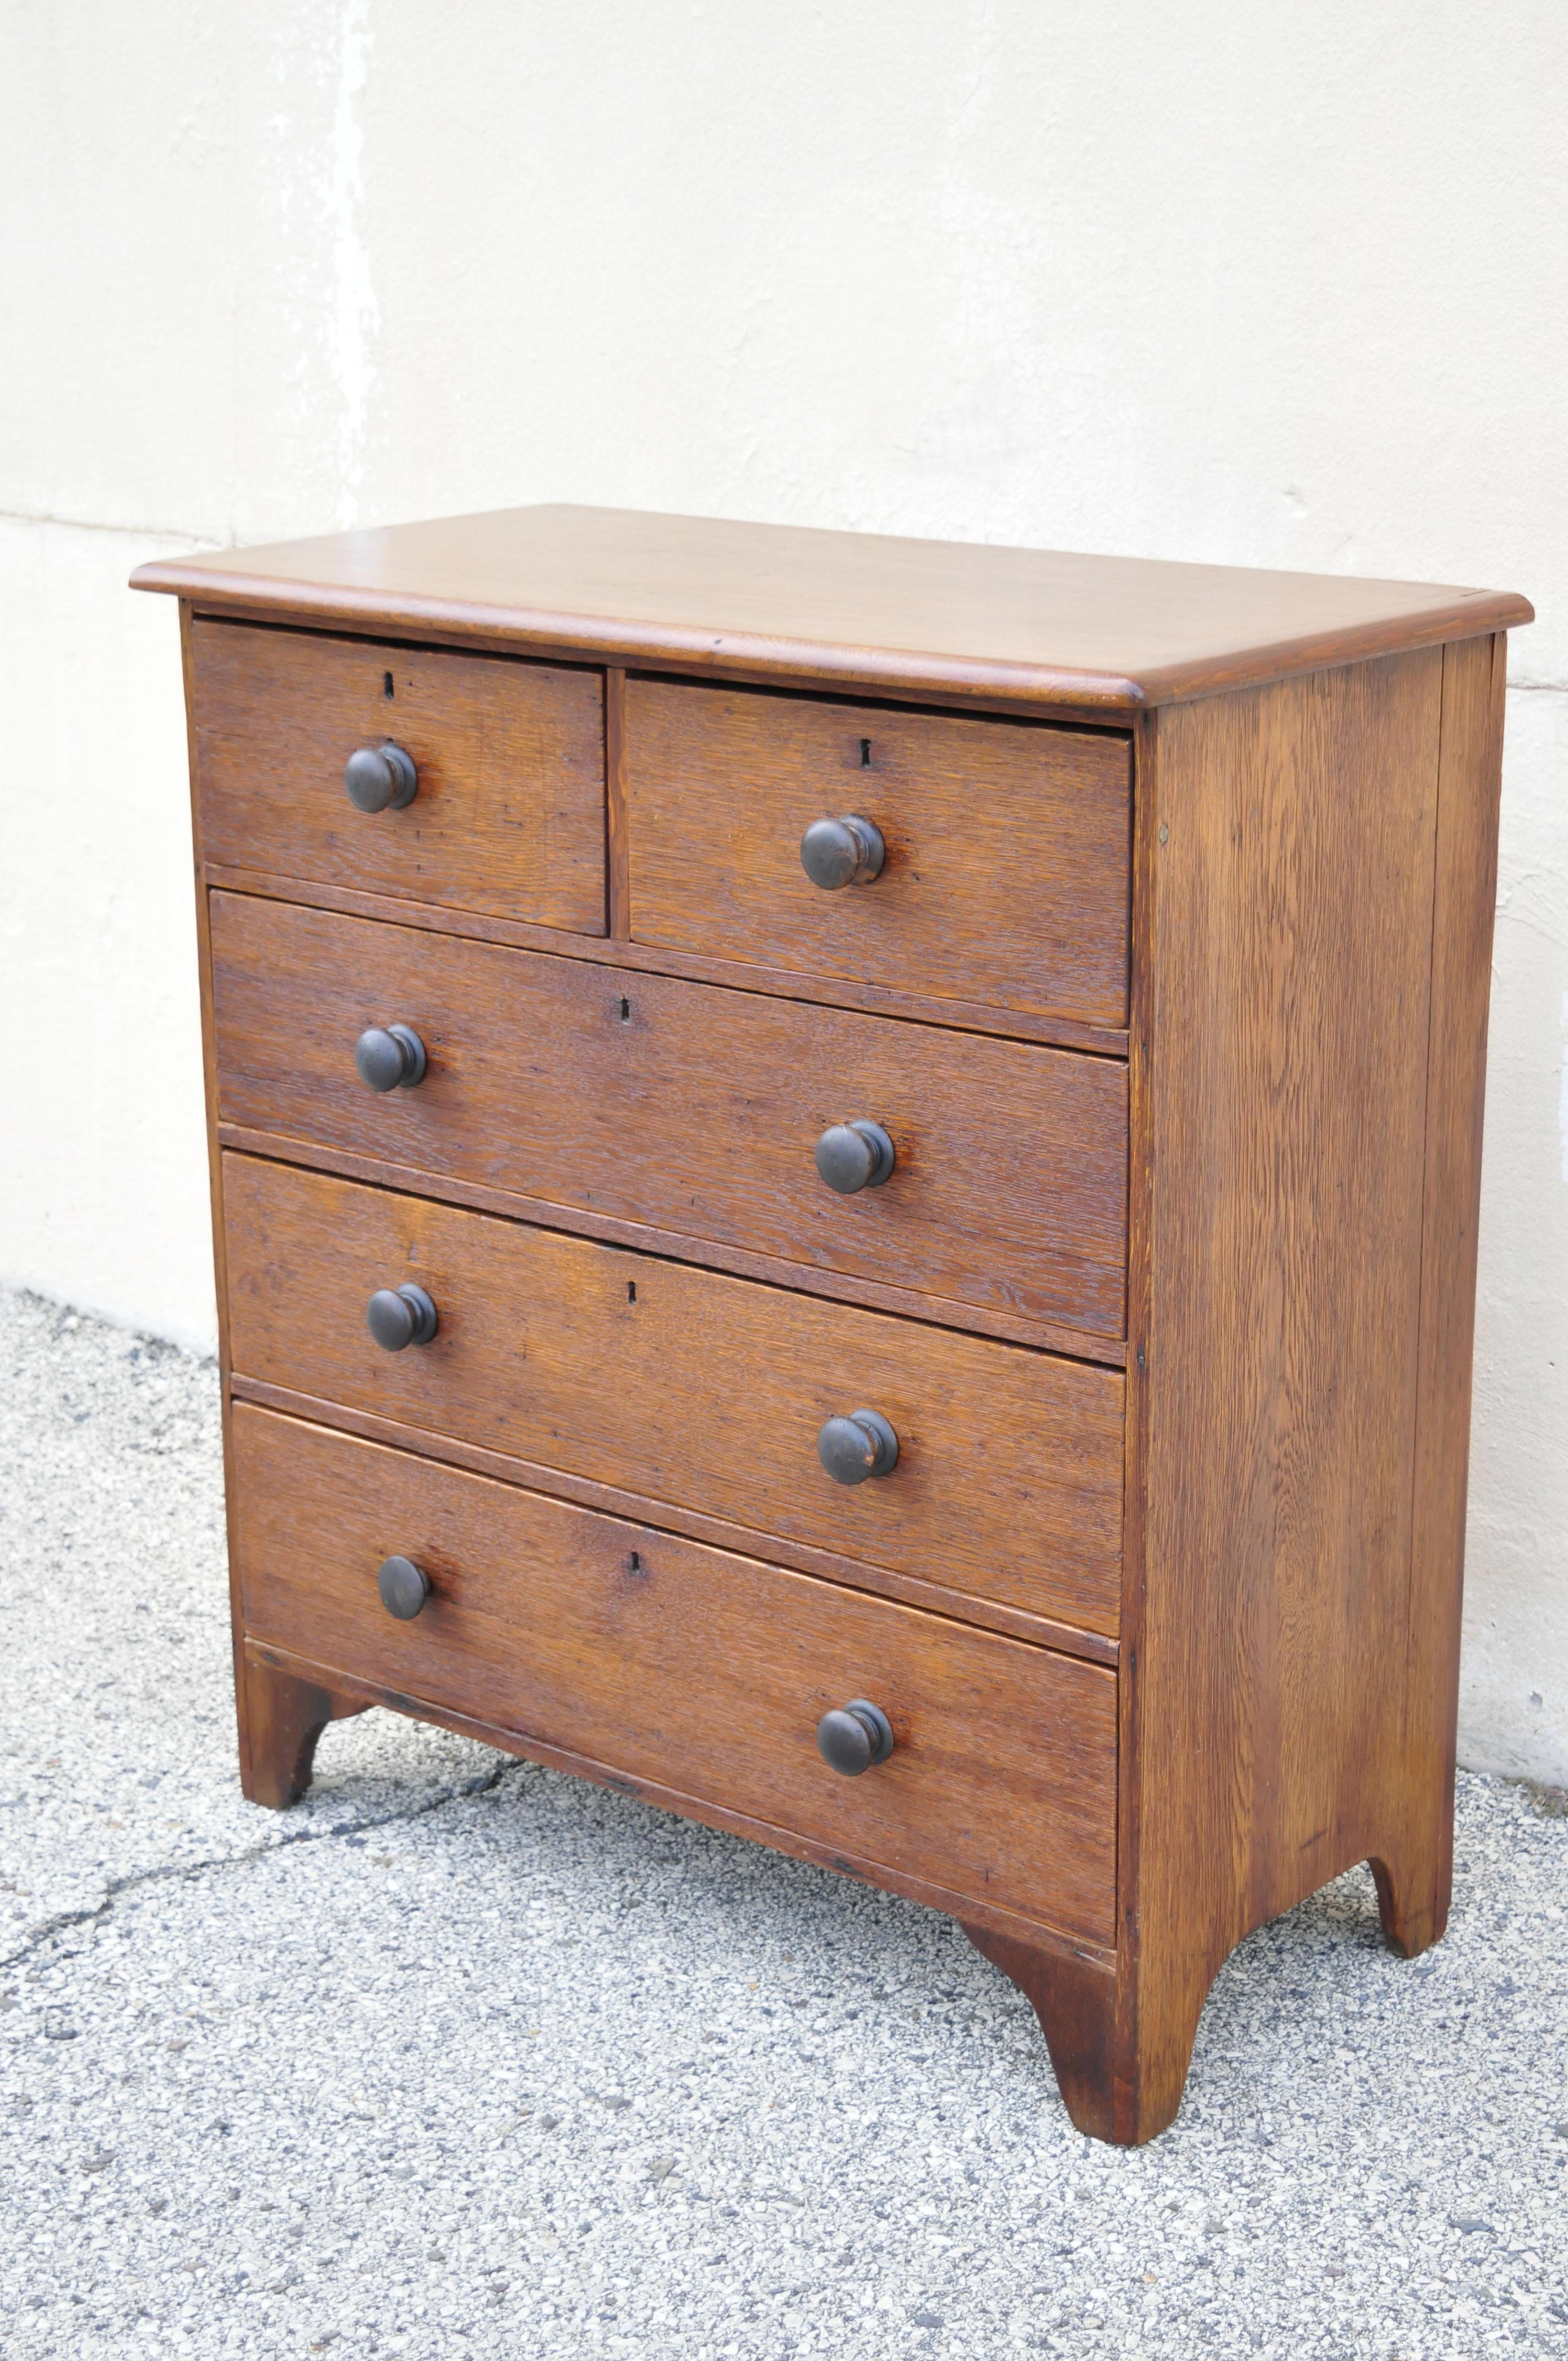 19th C. English Arts & Crafts oak wood highboy tall chest dresser. Item features solid wood construction, beautiful wood grain, no key, but unlocked, 5 dovetailed drawers, very nice antique item, quality craftsmanship, great style and form. Some